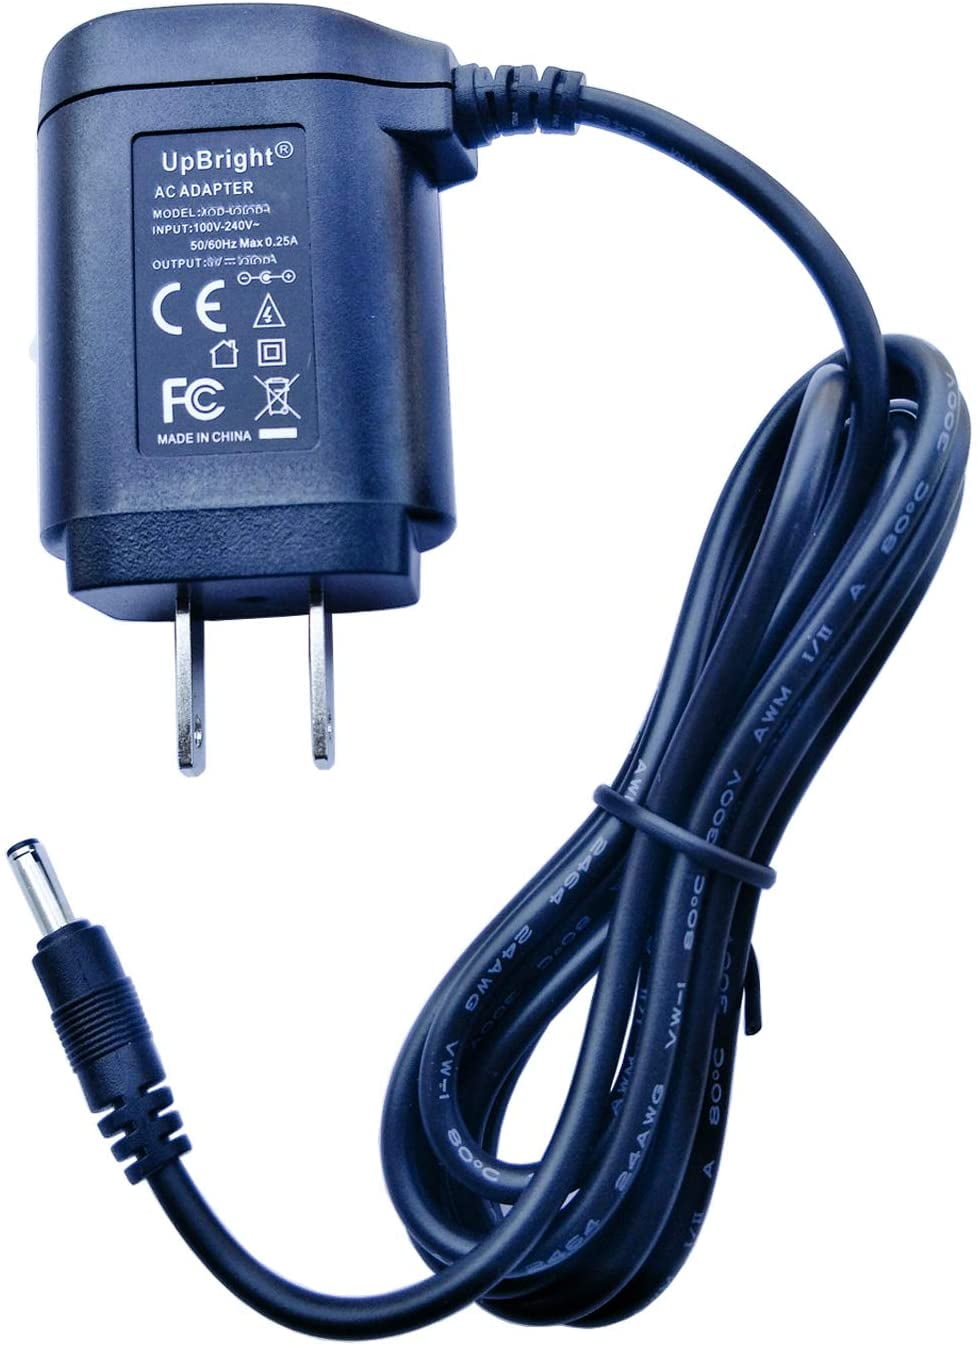 WALL Charger AC adapter for Craftsman 6300 WATT ELECTRIC START power generator 